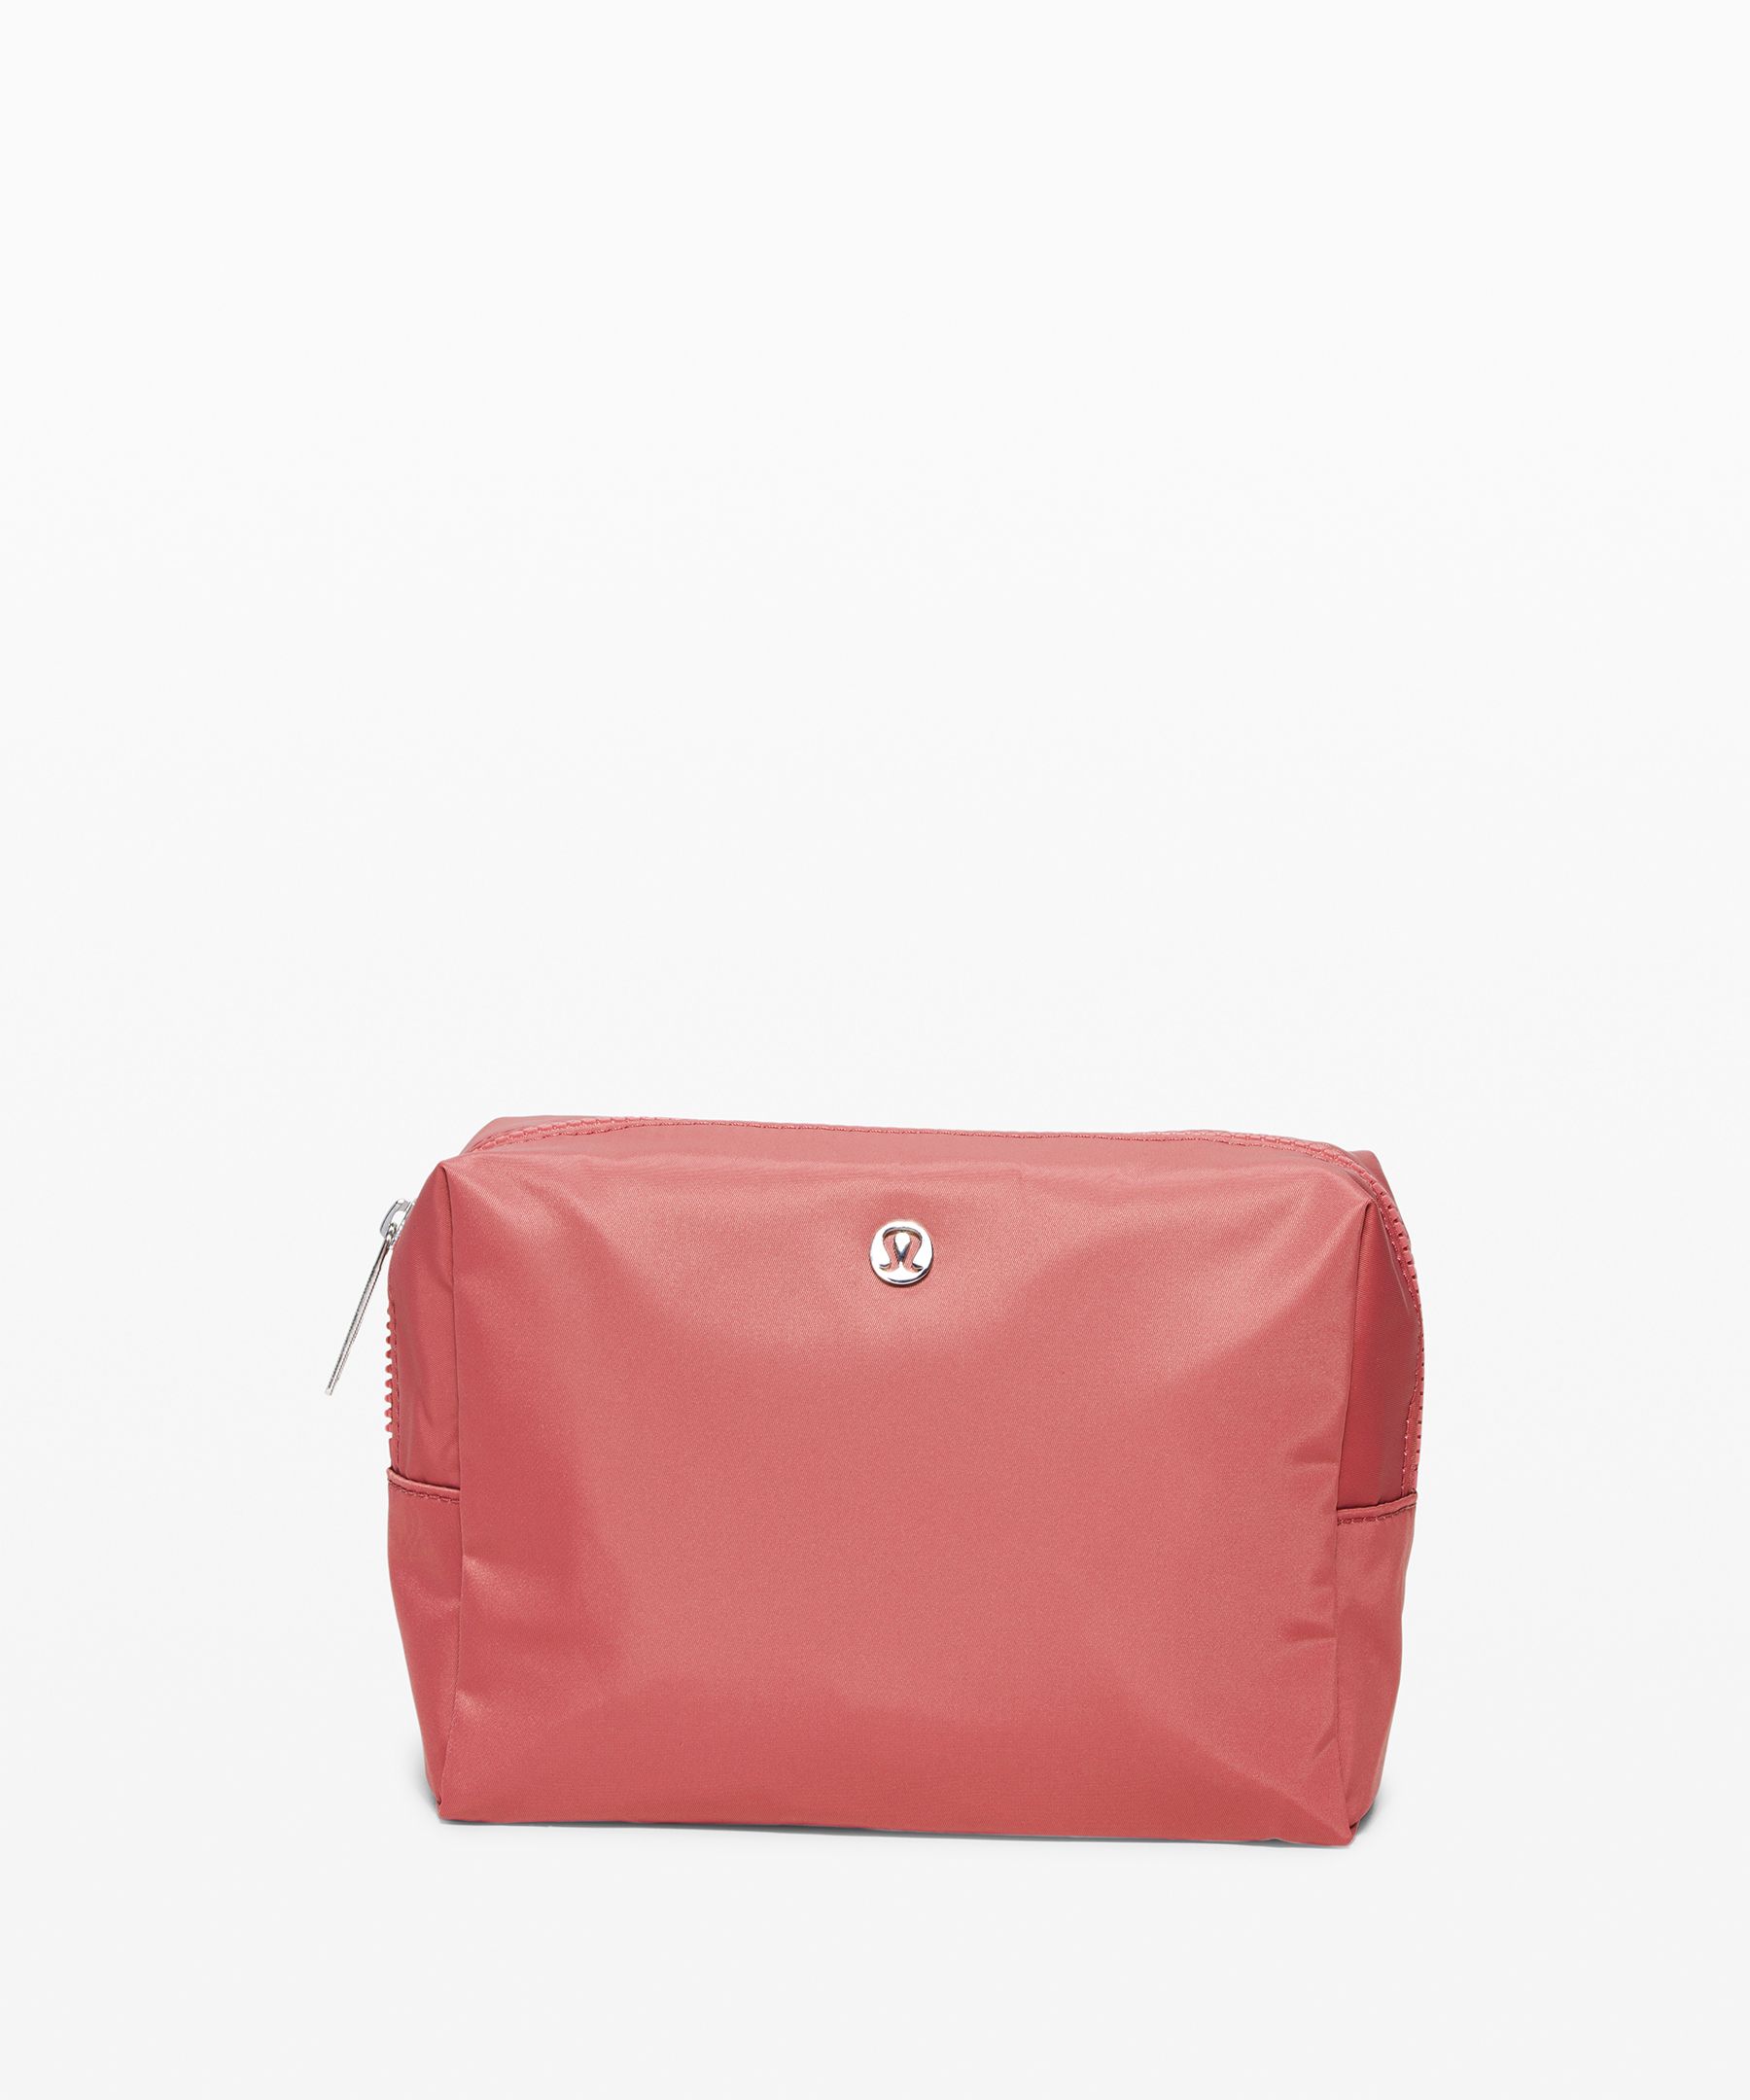 Lululemon All Your Small Things Pouch *4l In Cherry Tint